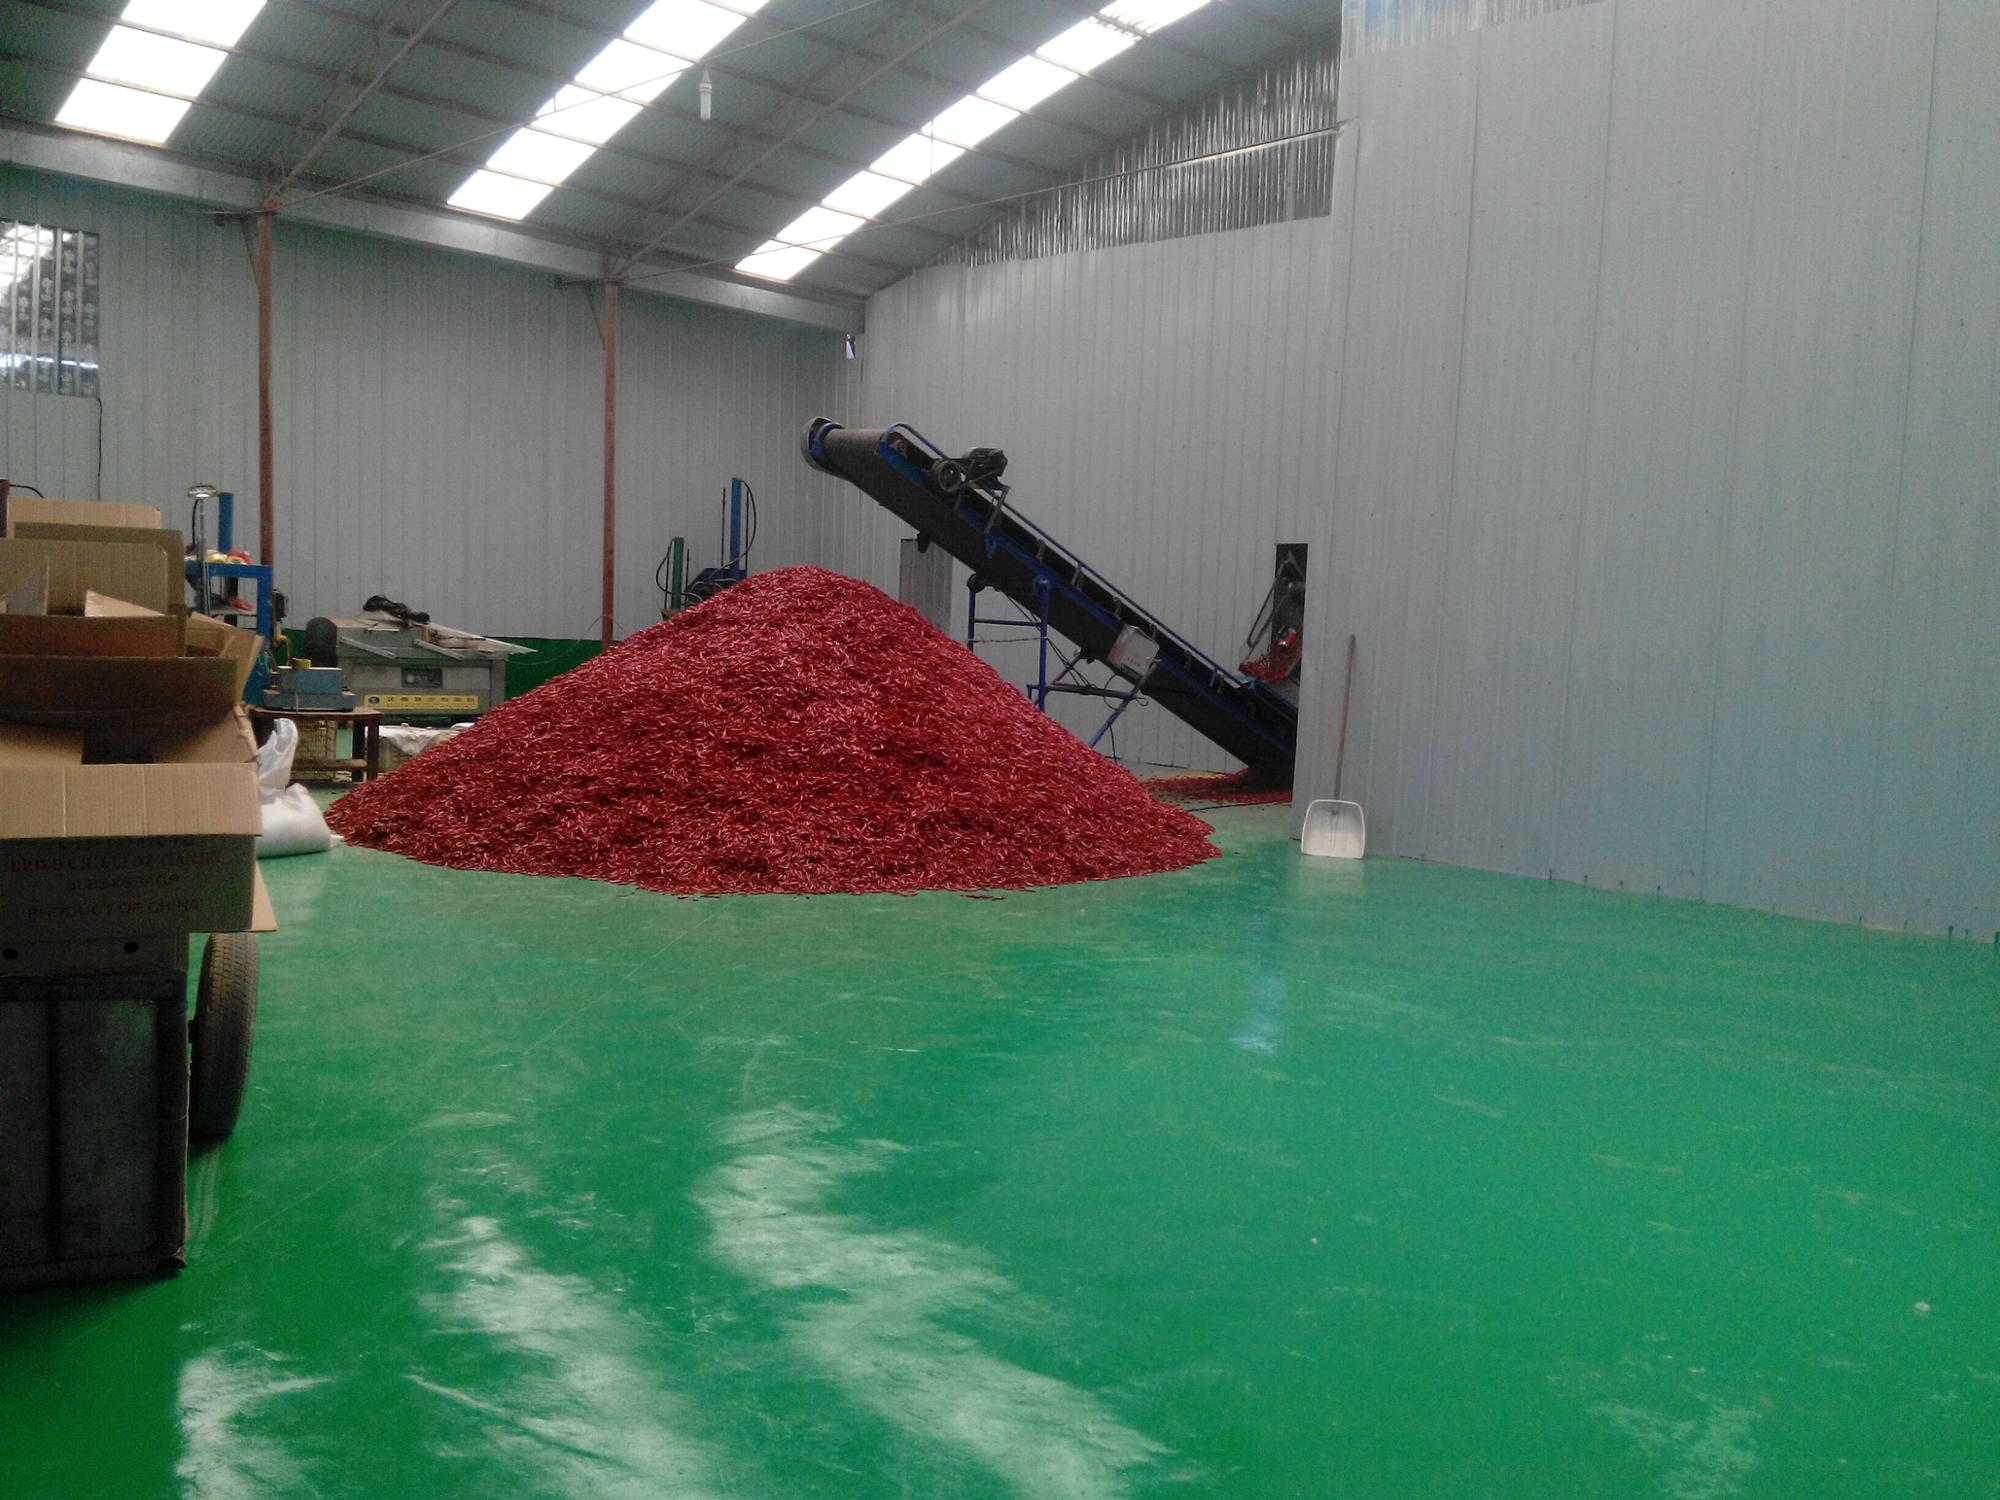 Affordable Price Chinese Chili red pepper powder